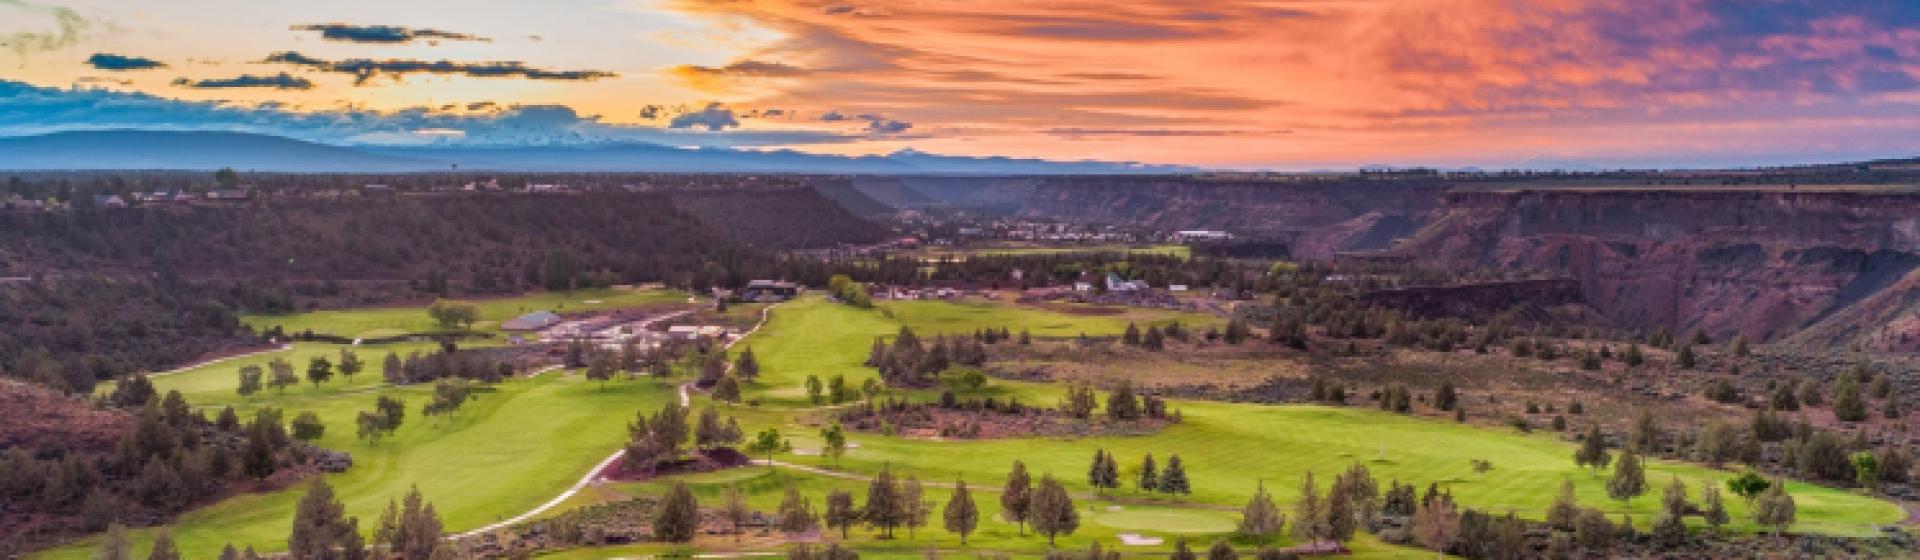 Sunset looking over an aerial view of the Crooked River Ranch Gold Course